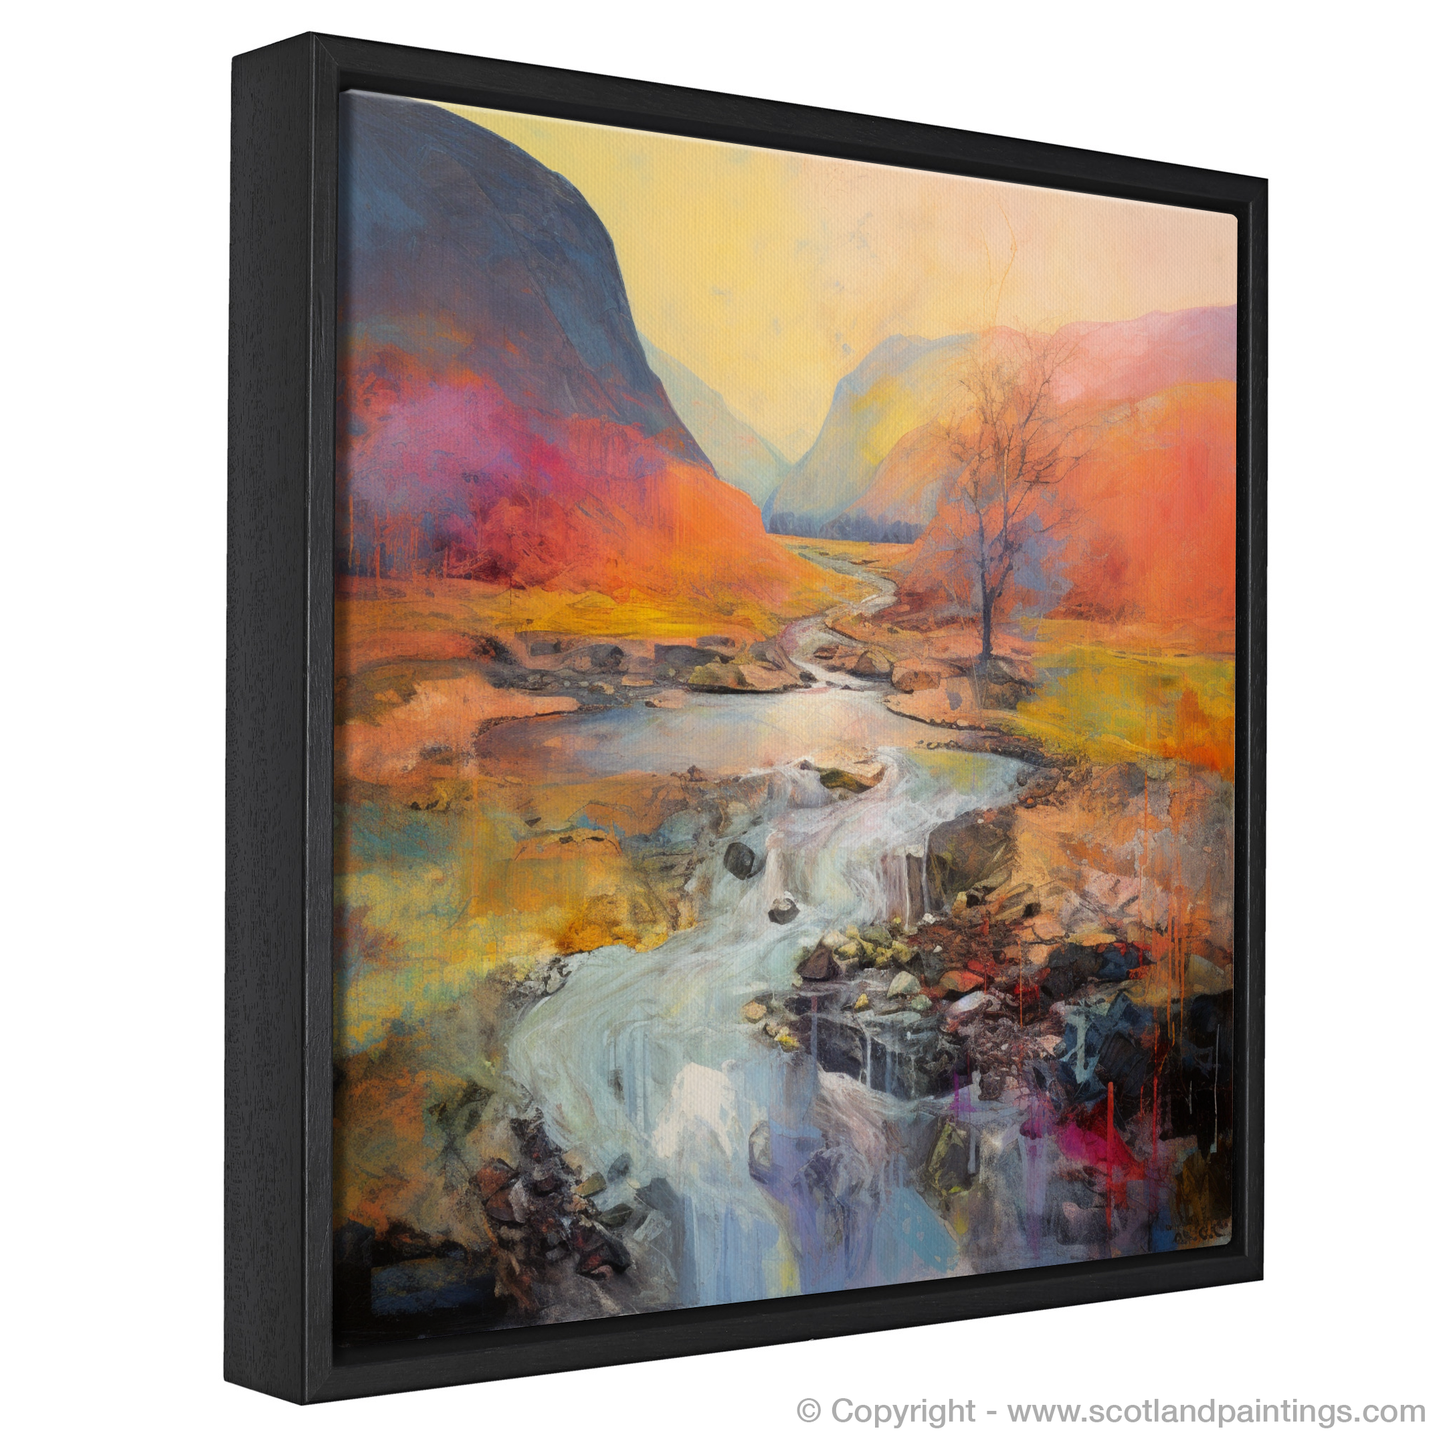 Painting and Art Print of Walker crossing River Coe in Glencoe entitled "Abstract Essence of Glencoe: Walker Crossing River Coe".